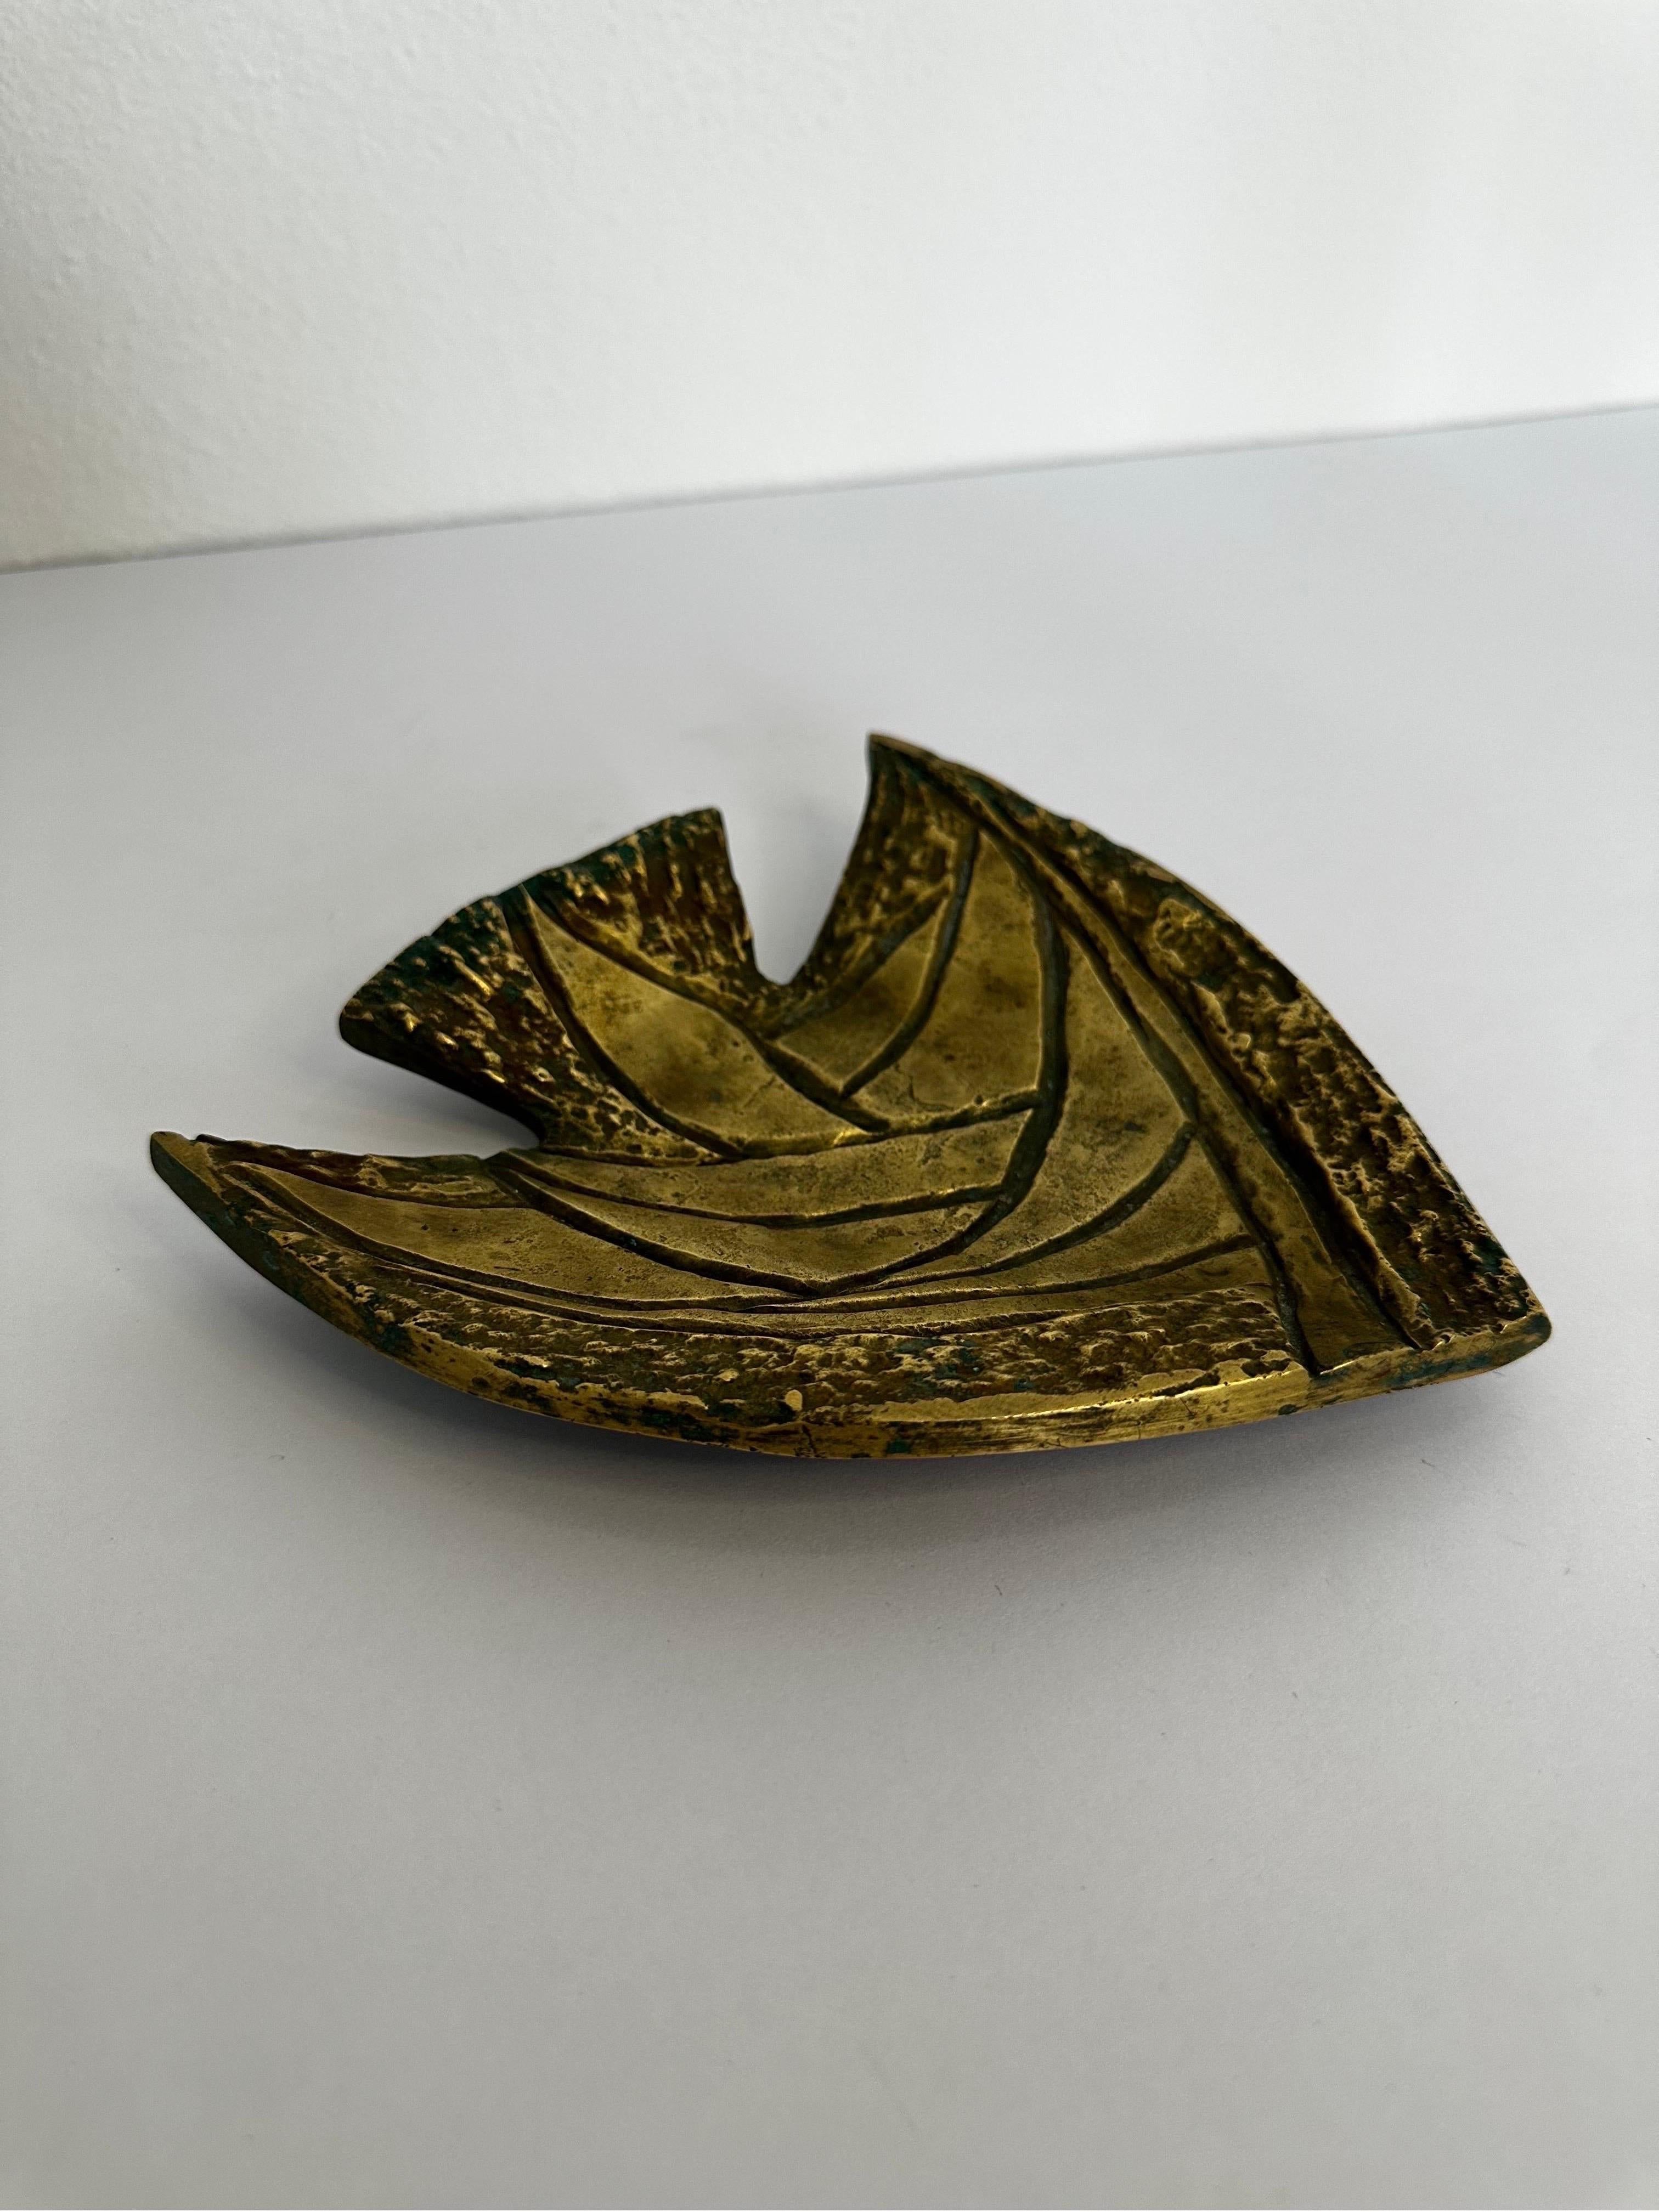 Mid-Century Modern Brazilian Modern Bronze Tray or Catch All With Geometric Designs, 1960s For Sale